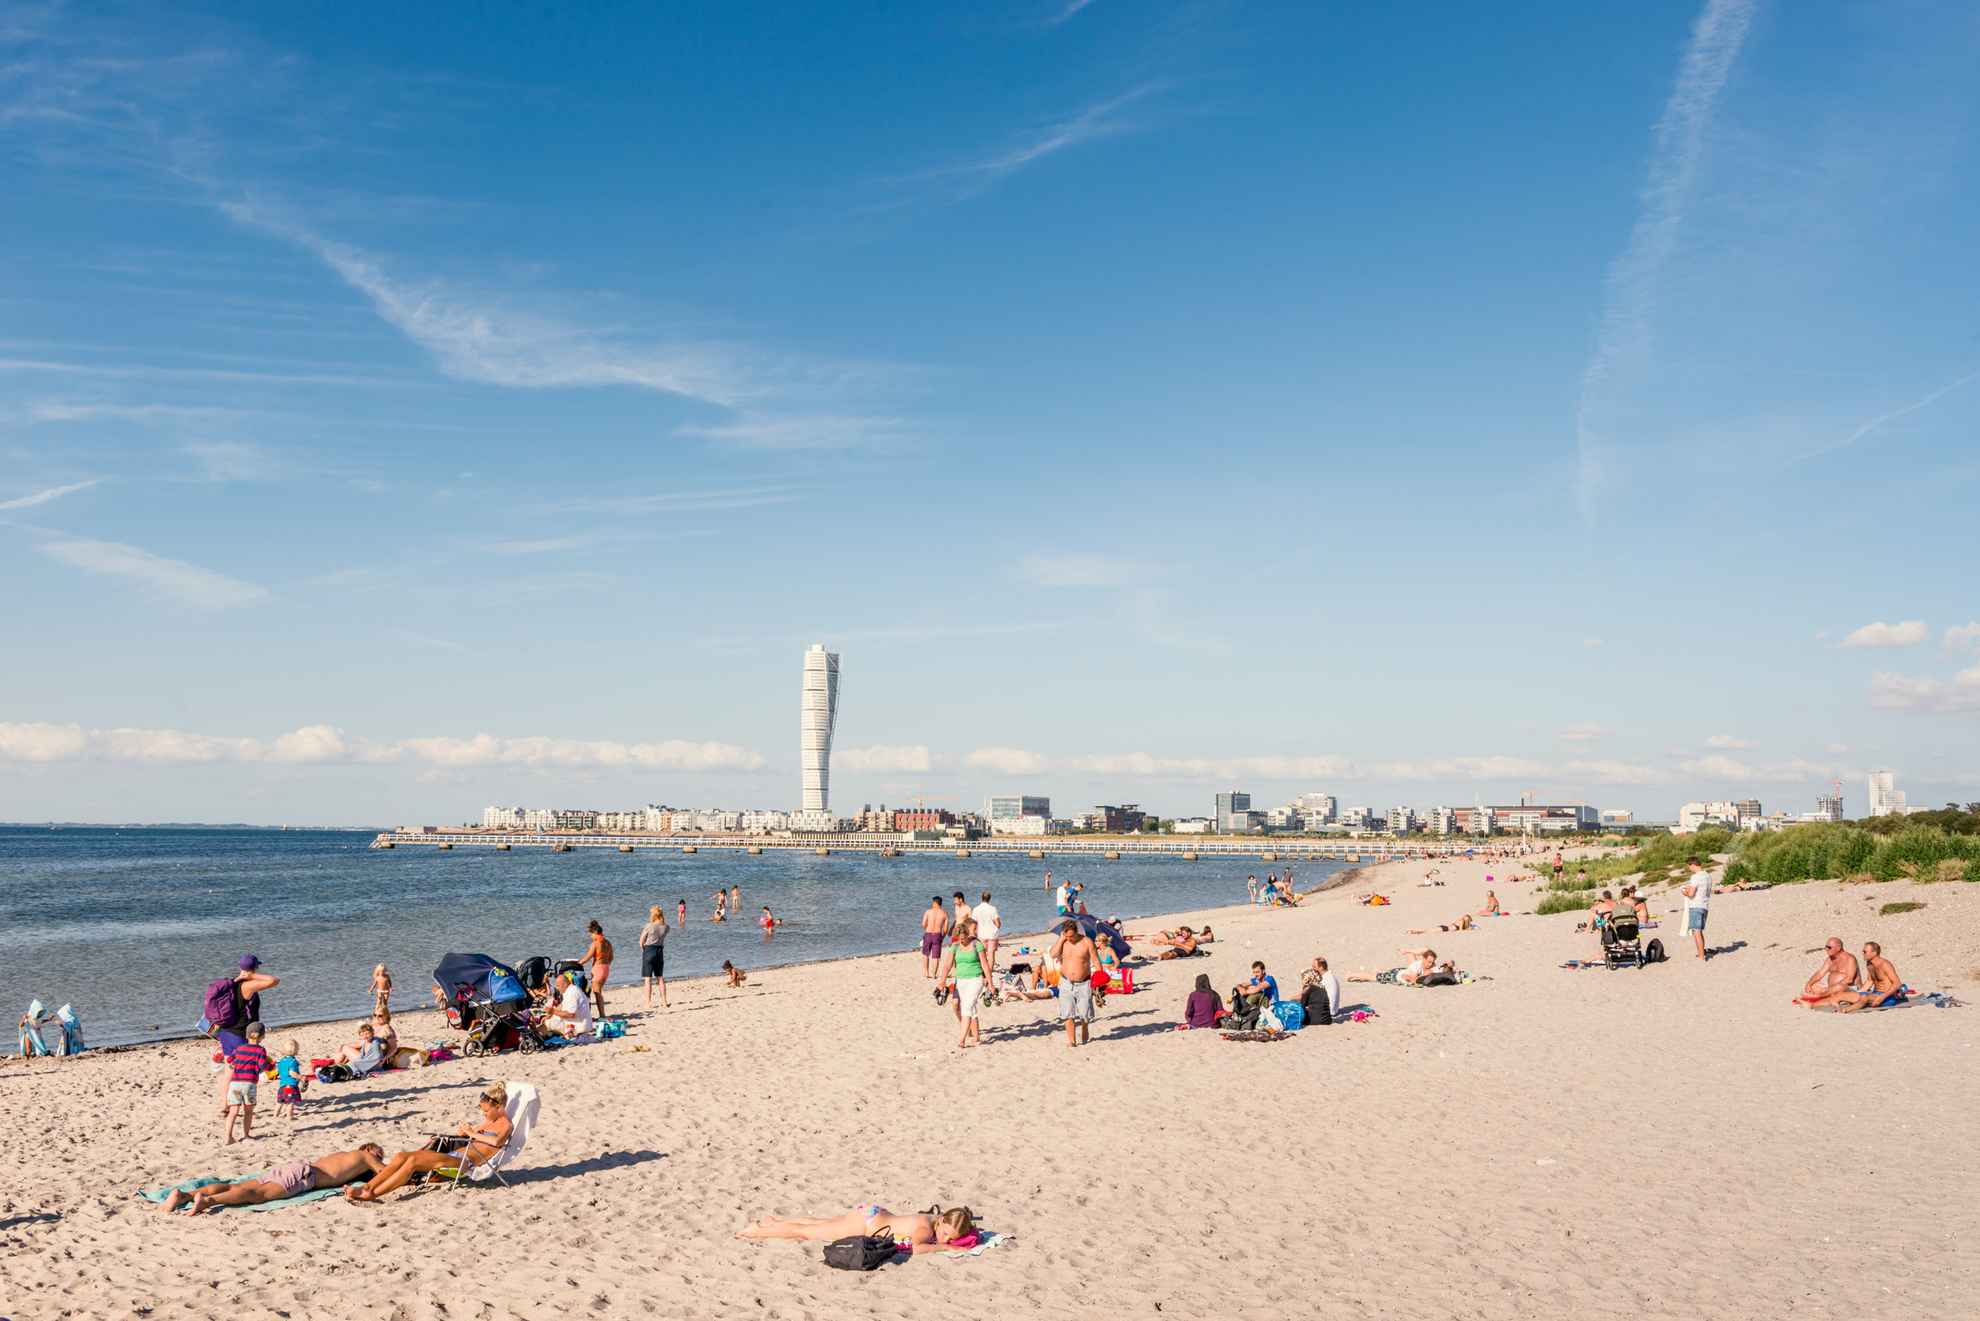 People enjoying themself at a beach in Malmö. In the horizon you can glimt the building "Turning Torso".